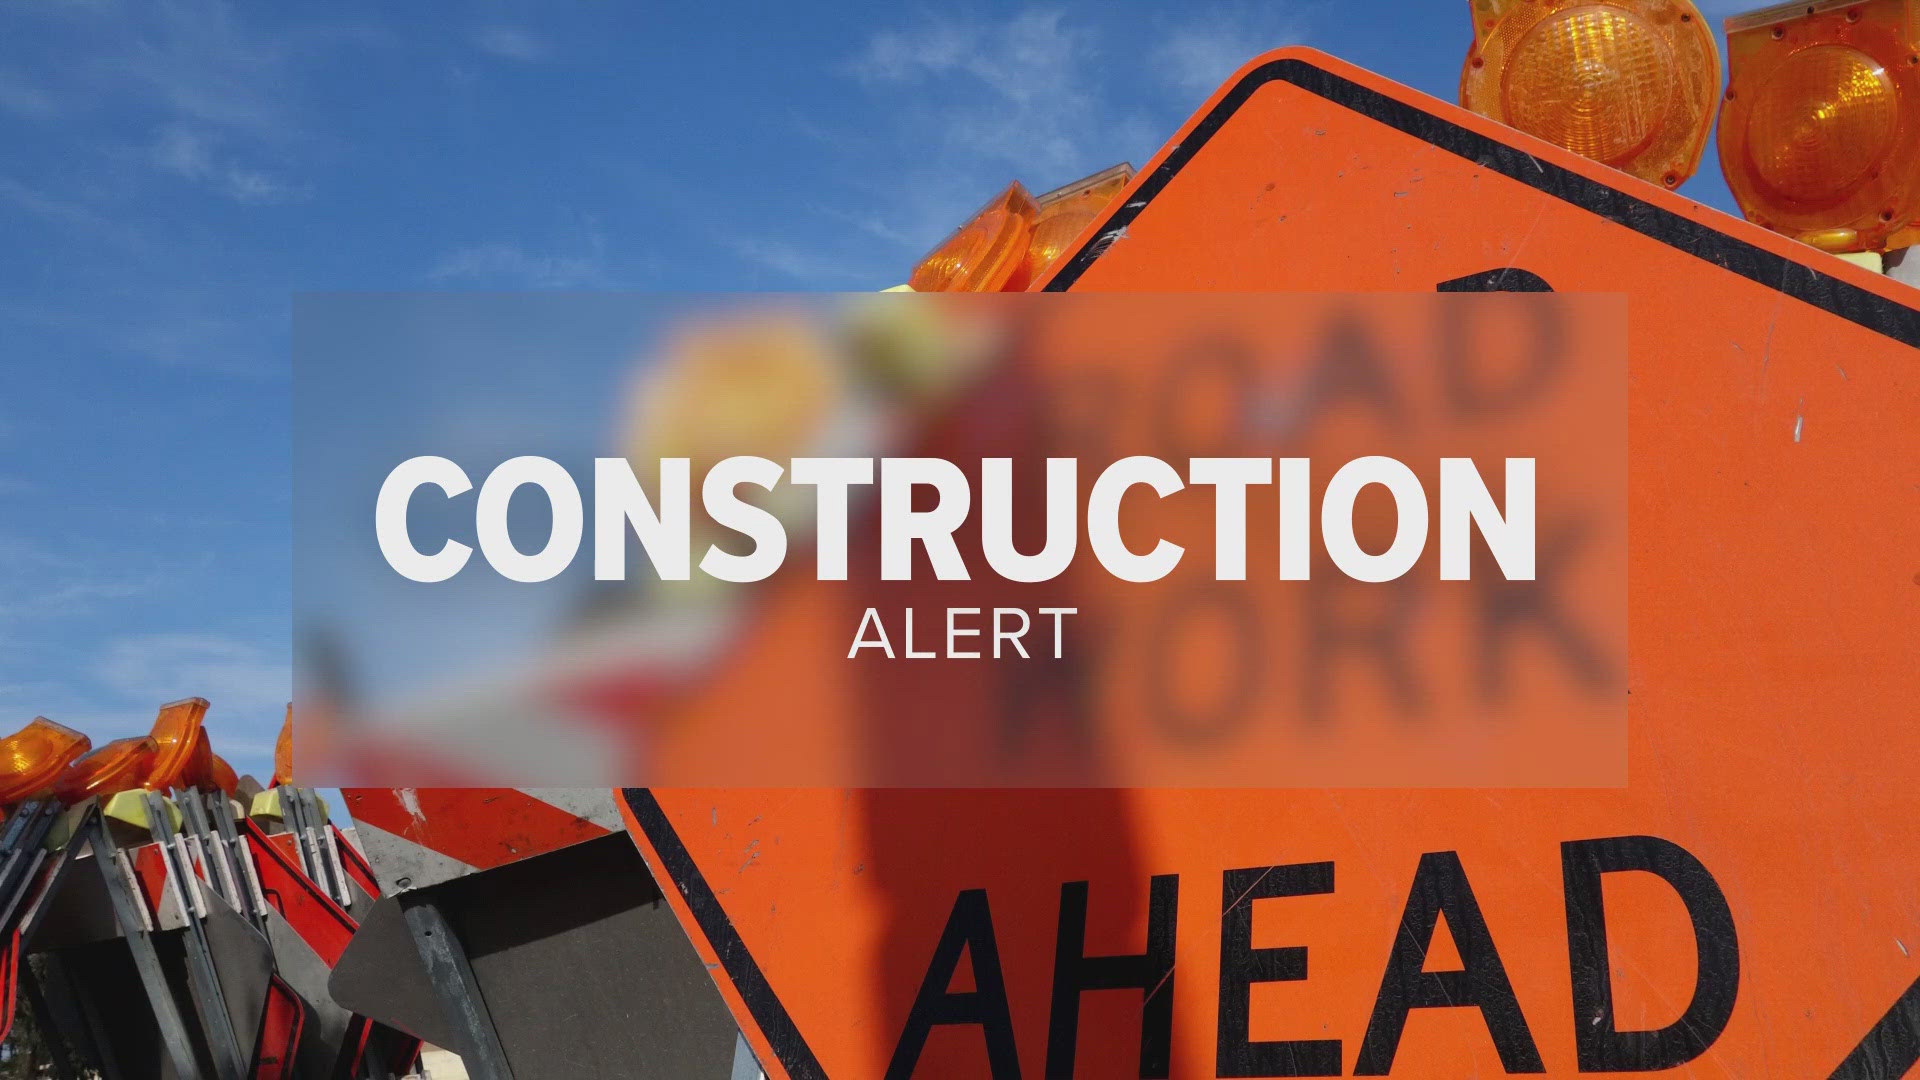 The Eastbound side of the eye-196 business loop between Holland and Zeeland will close early tomorrow morning.